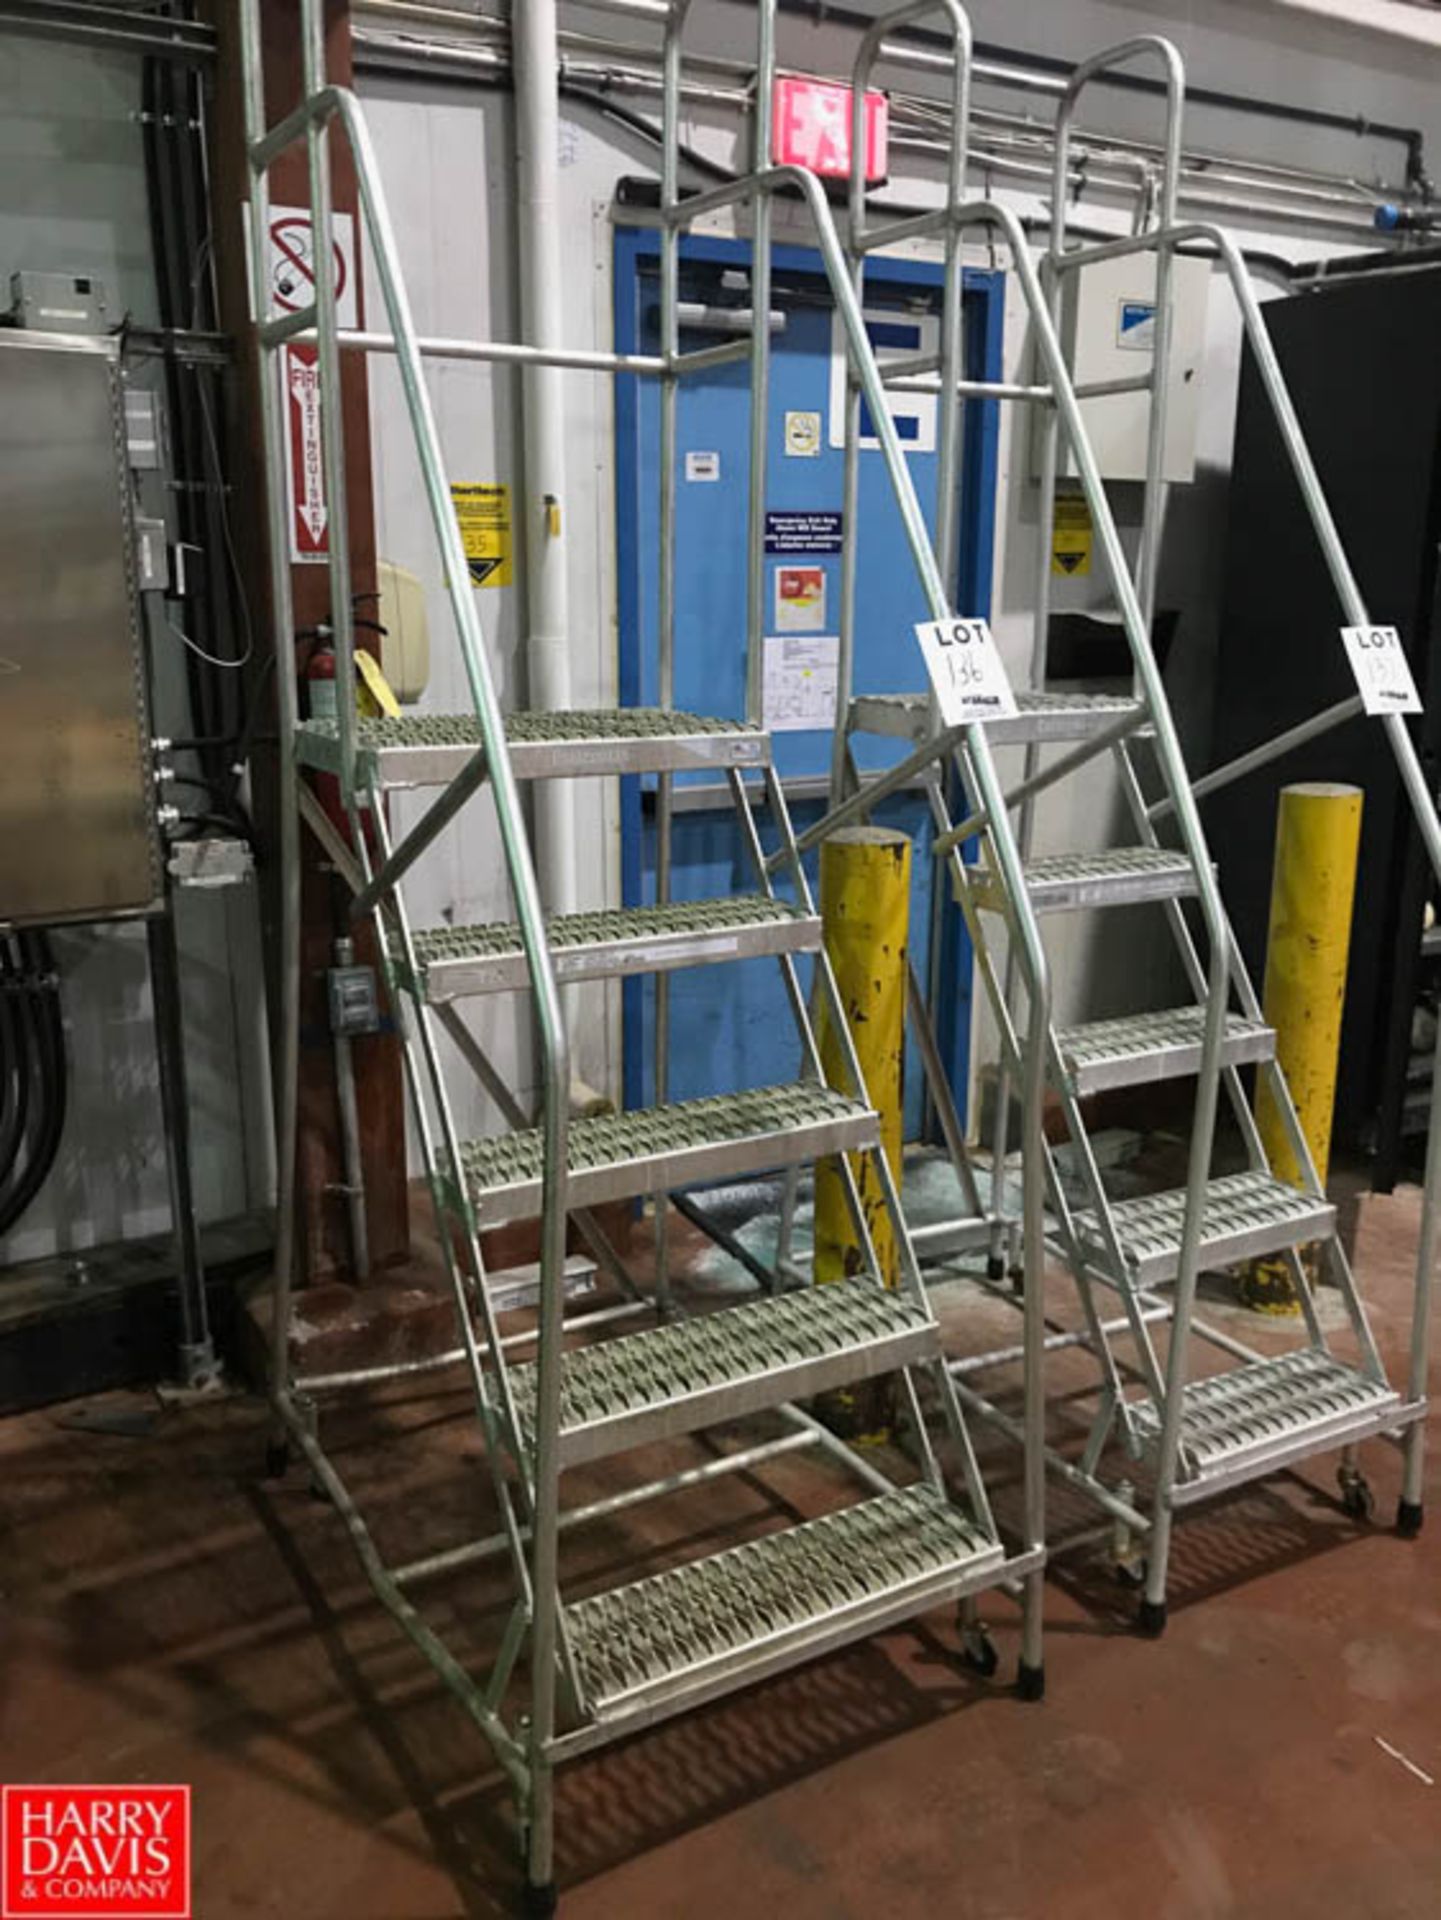 Cotterman Portable Stairs Rigging Fee: $ May Be Subject to Rigging